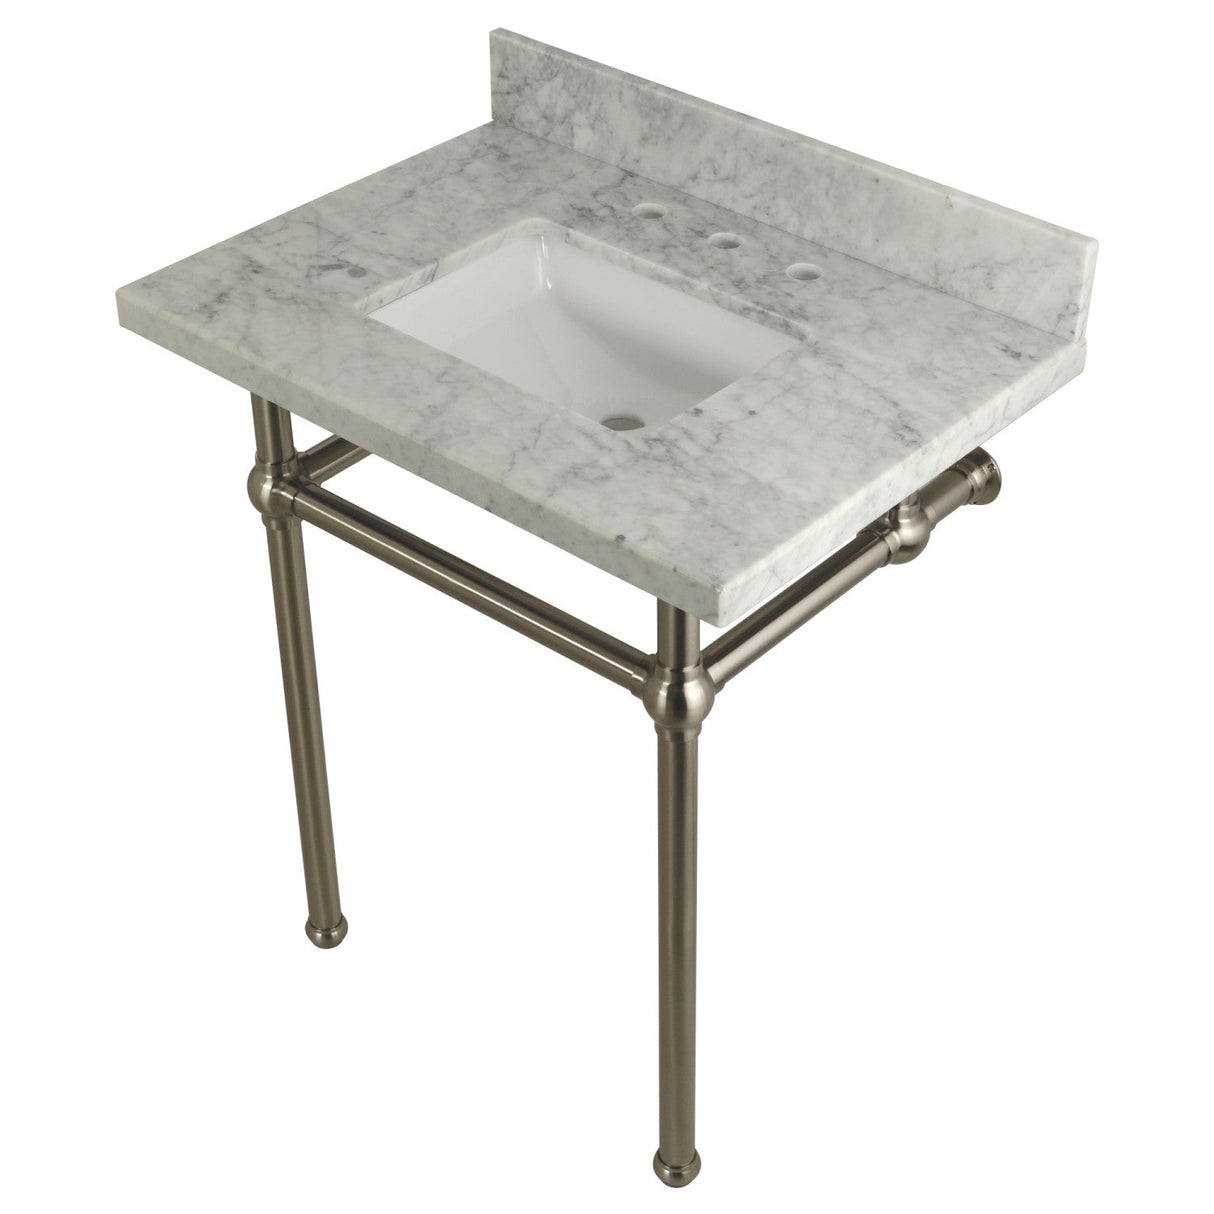 Fauceture KVPB30MBSQ8 30-Inch Marble Console Sink with Brass Feet, Carrara Marble/Brushed Nickel